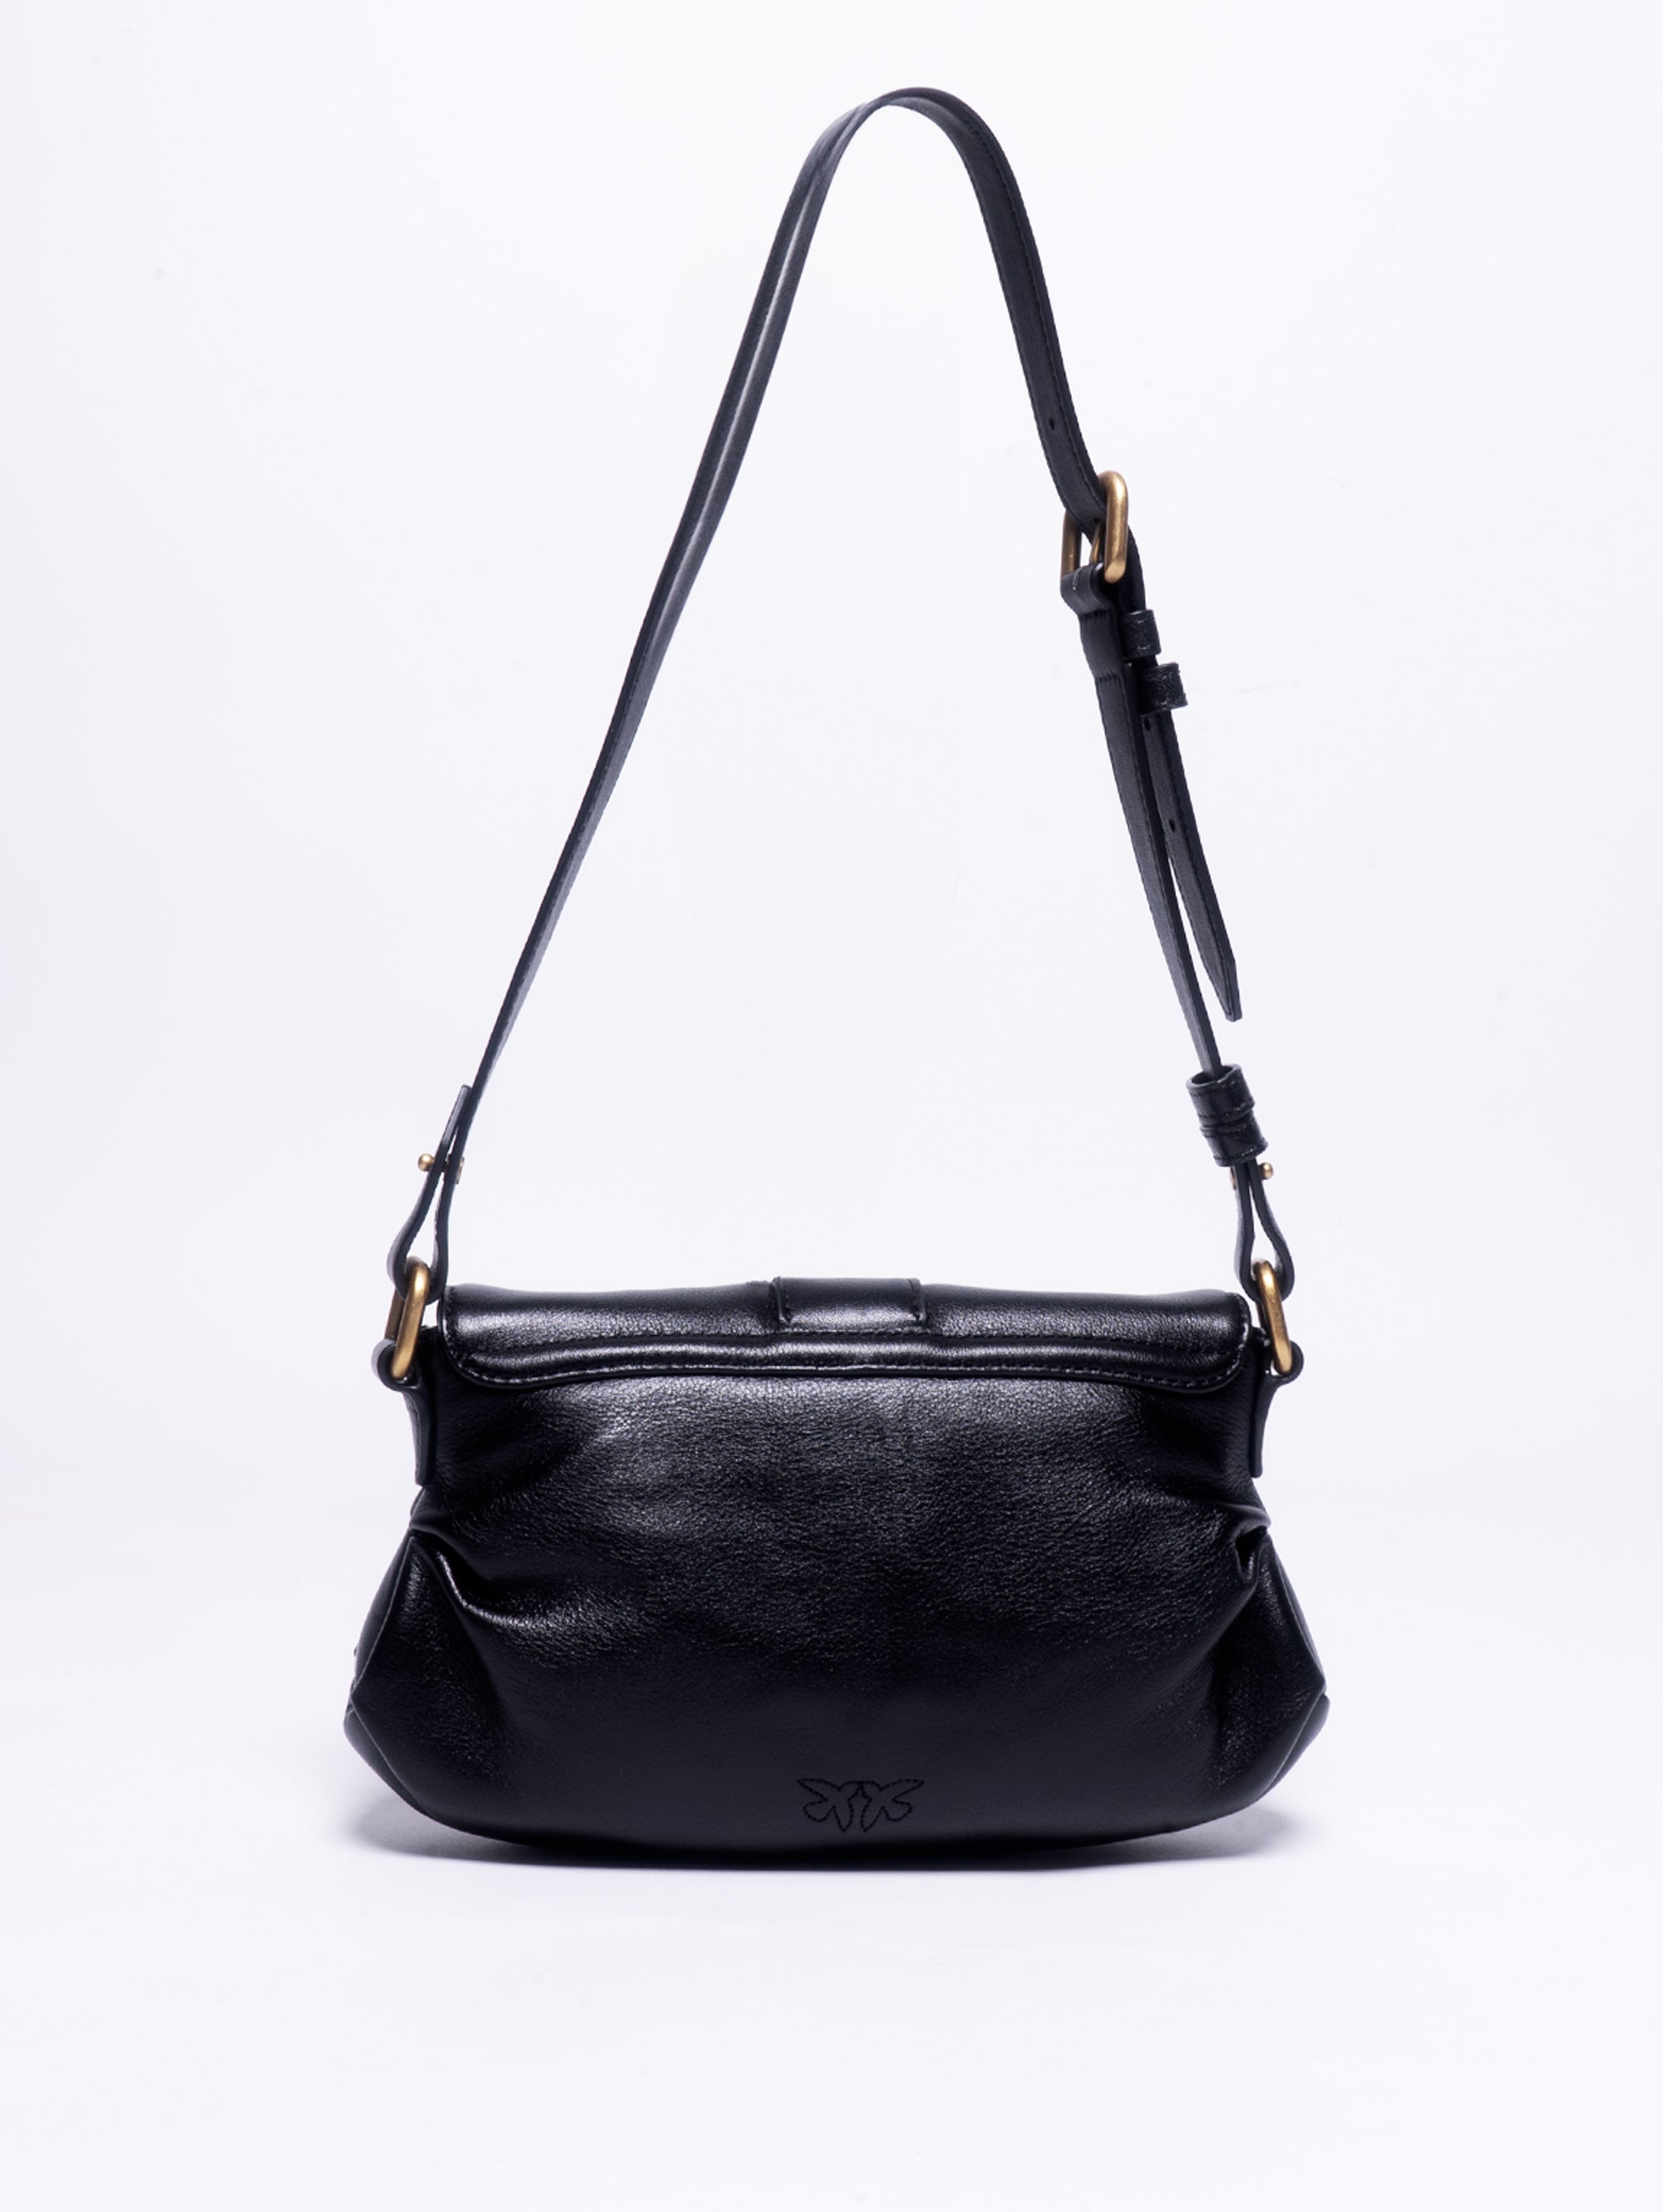 Mini Bag in Black Deconstructed Shiny Leather